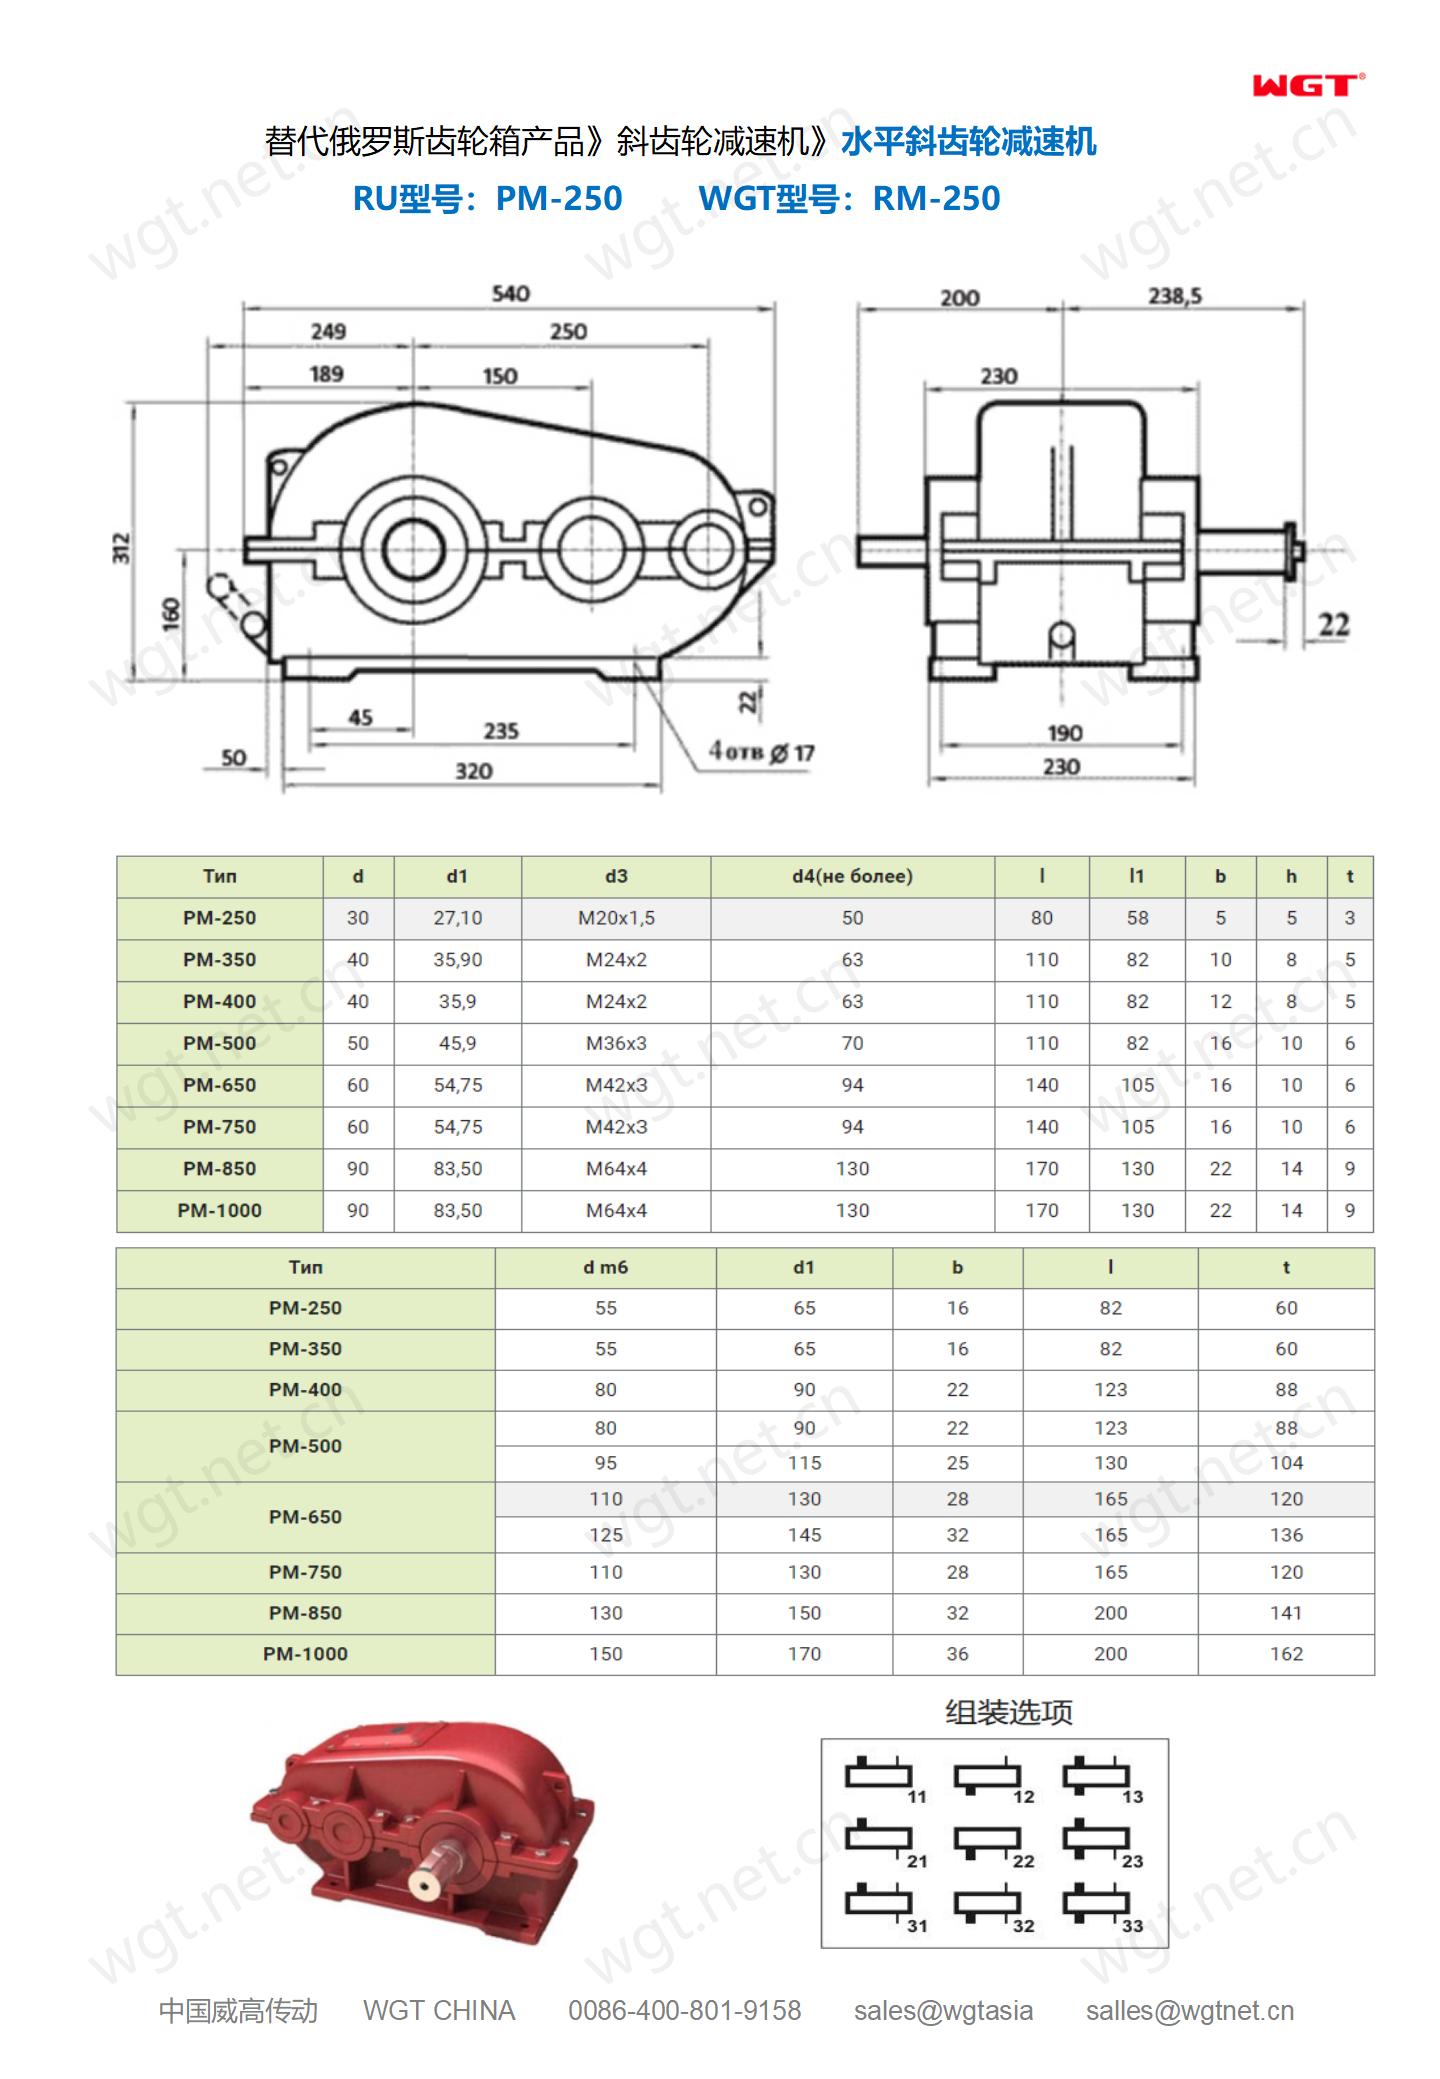 Horizontal helical gear reducer RM-250 for lifting and construction industry